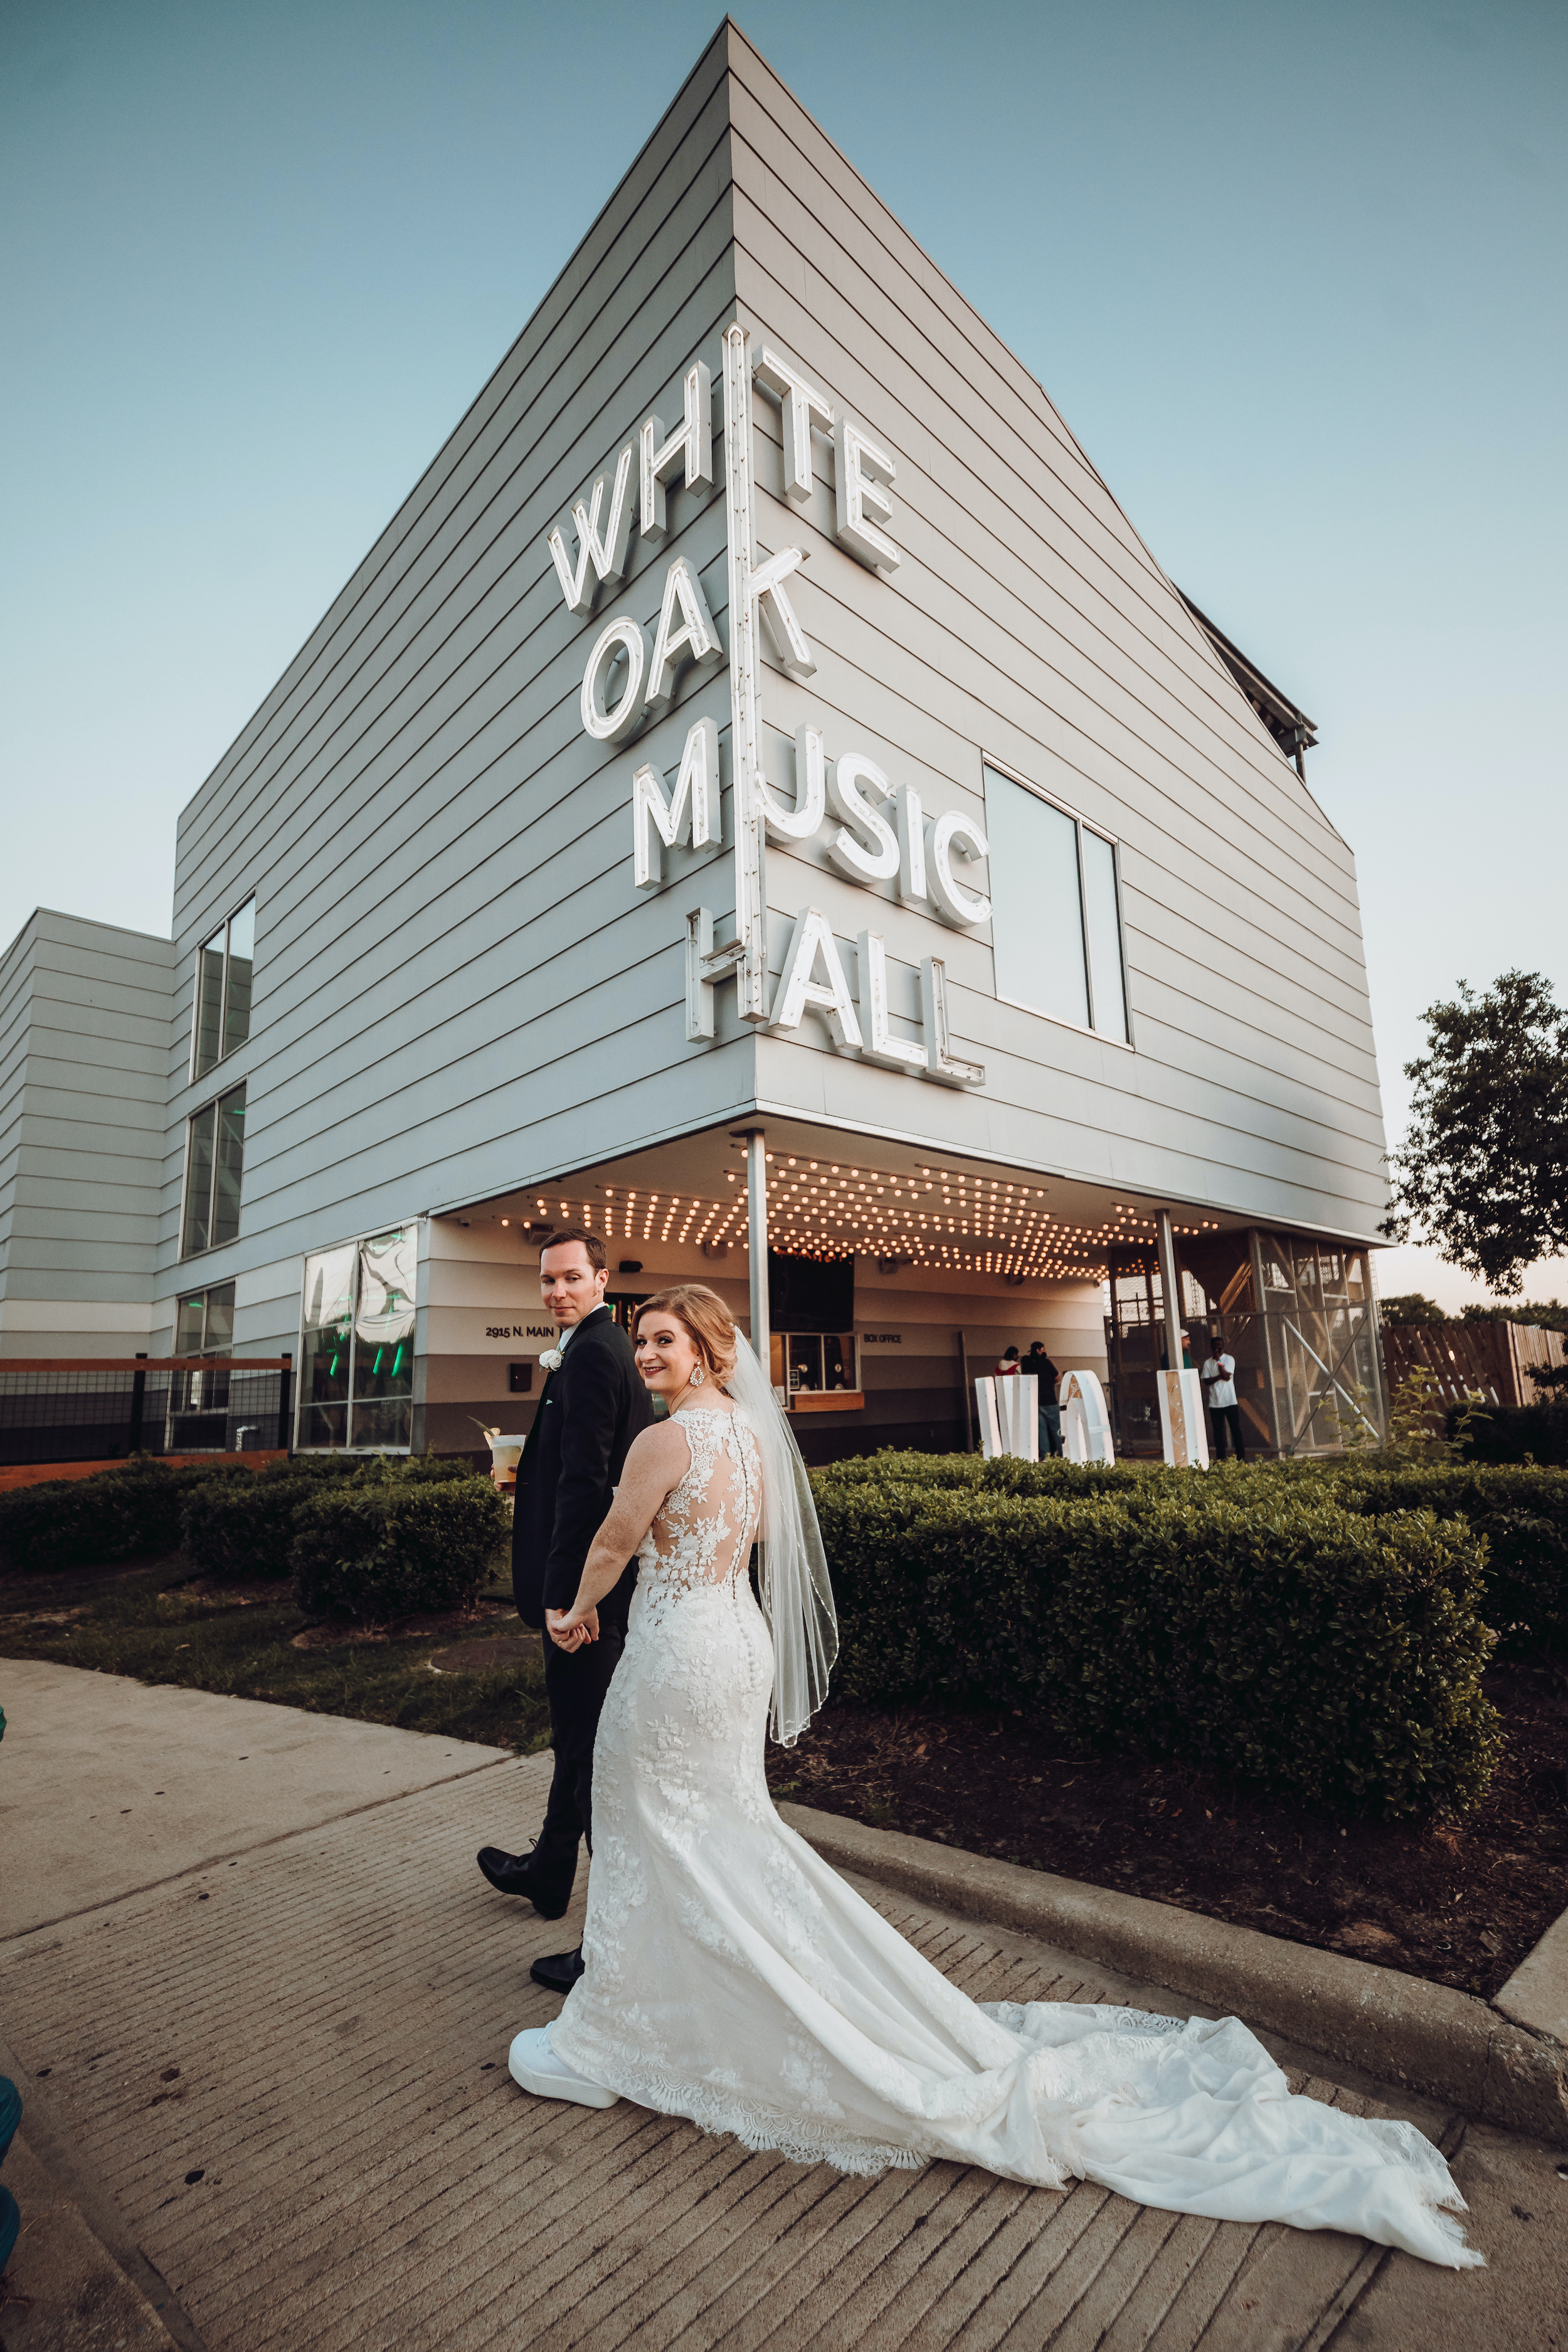 A bride and groom walk in front of their wedding venue in Houston, TX.